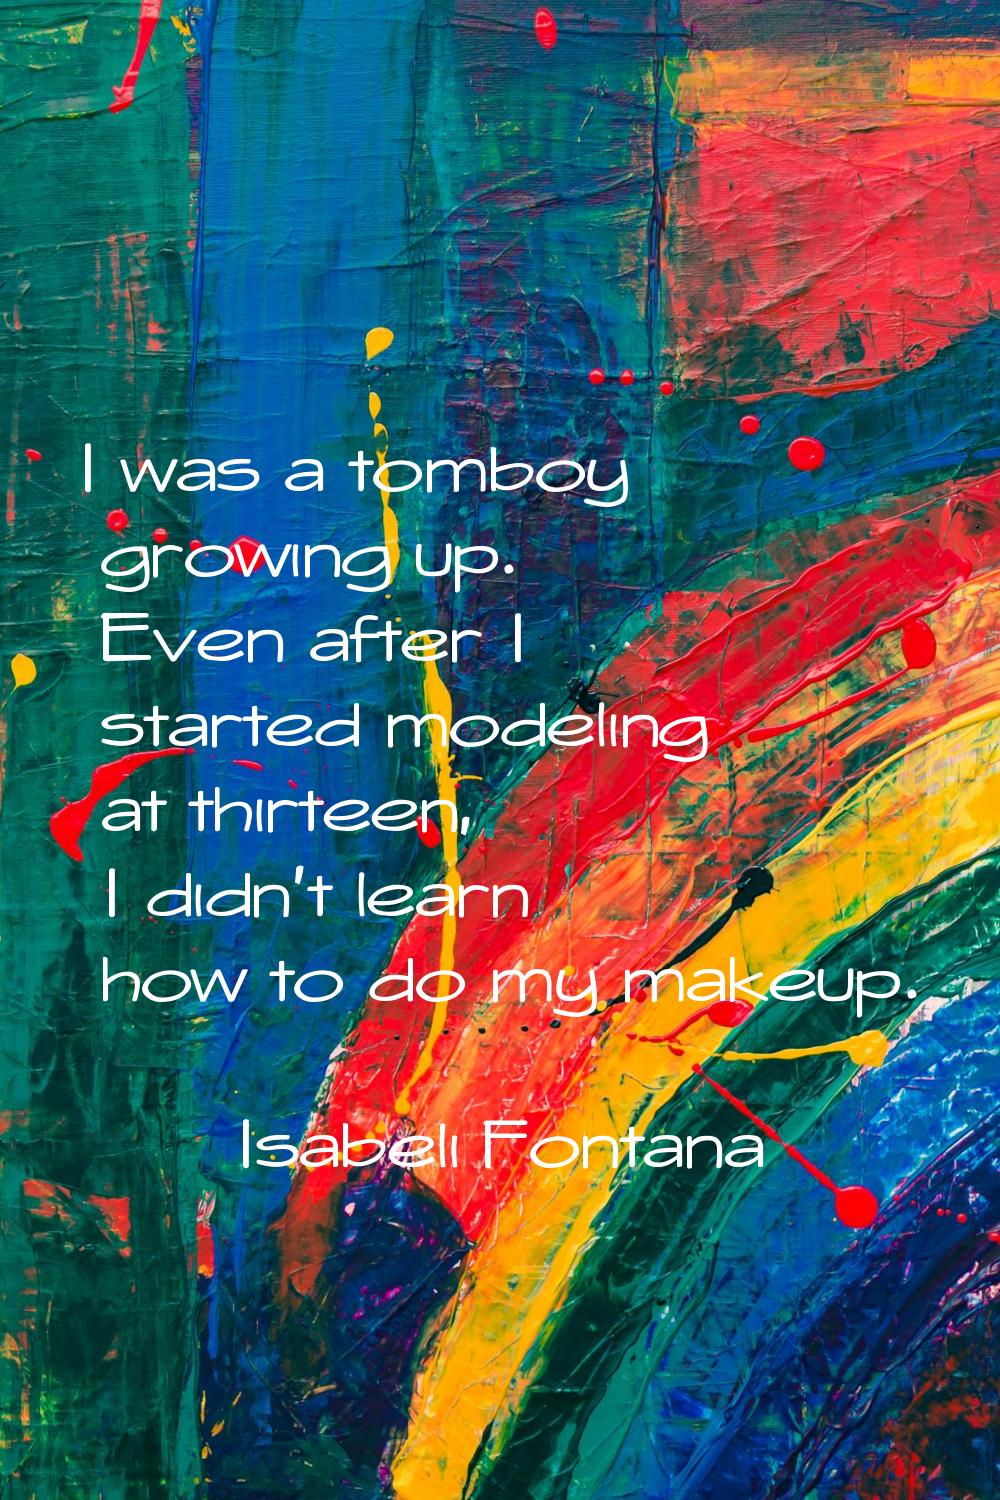 I was a tomboy growing up. Even after I started modeling at thirteen, I didn't learn how to do my m